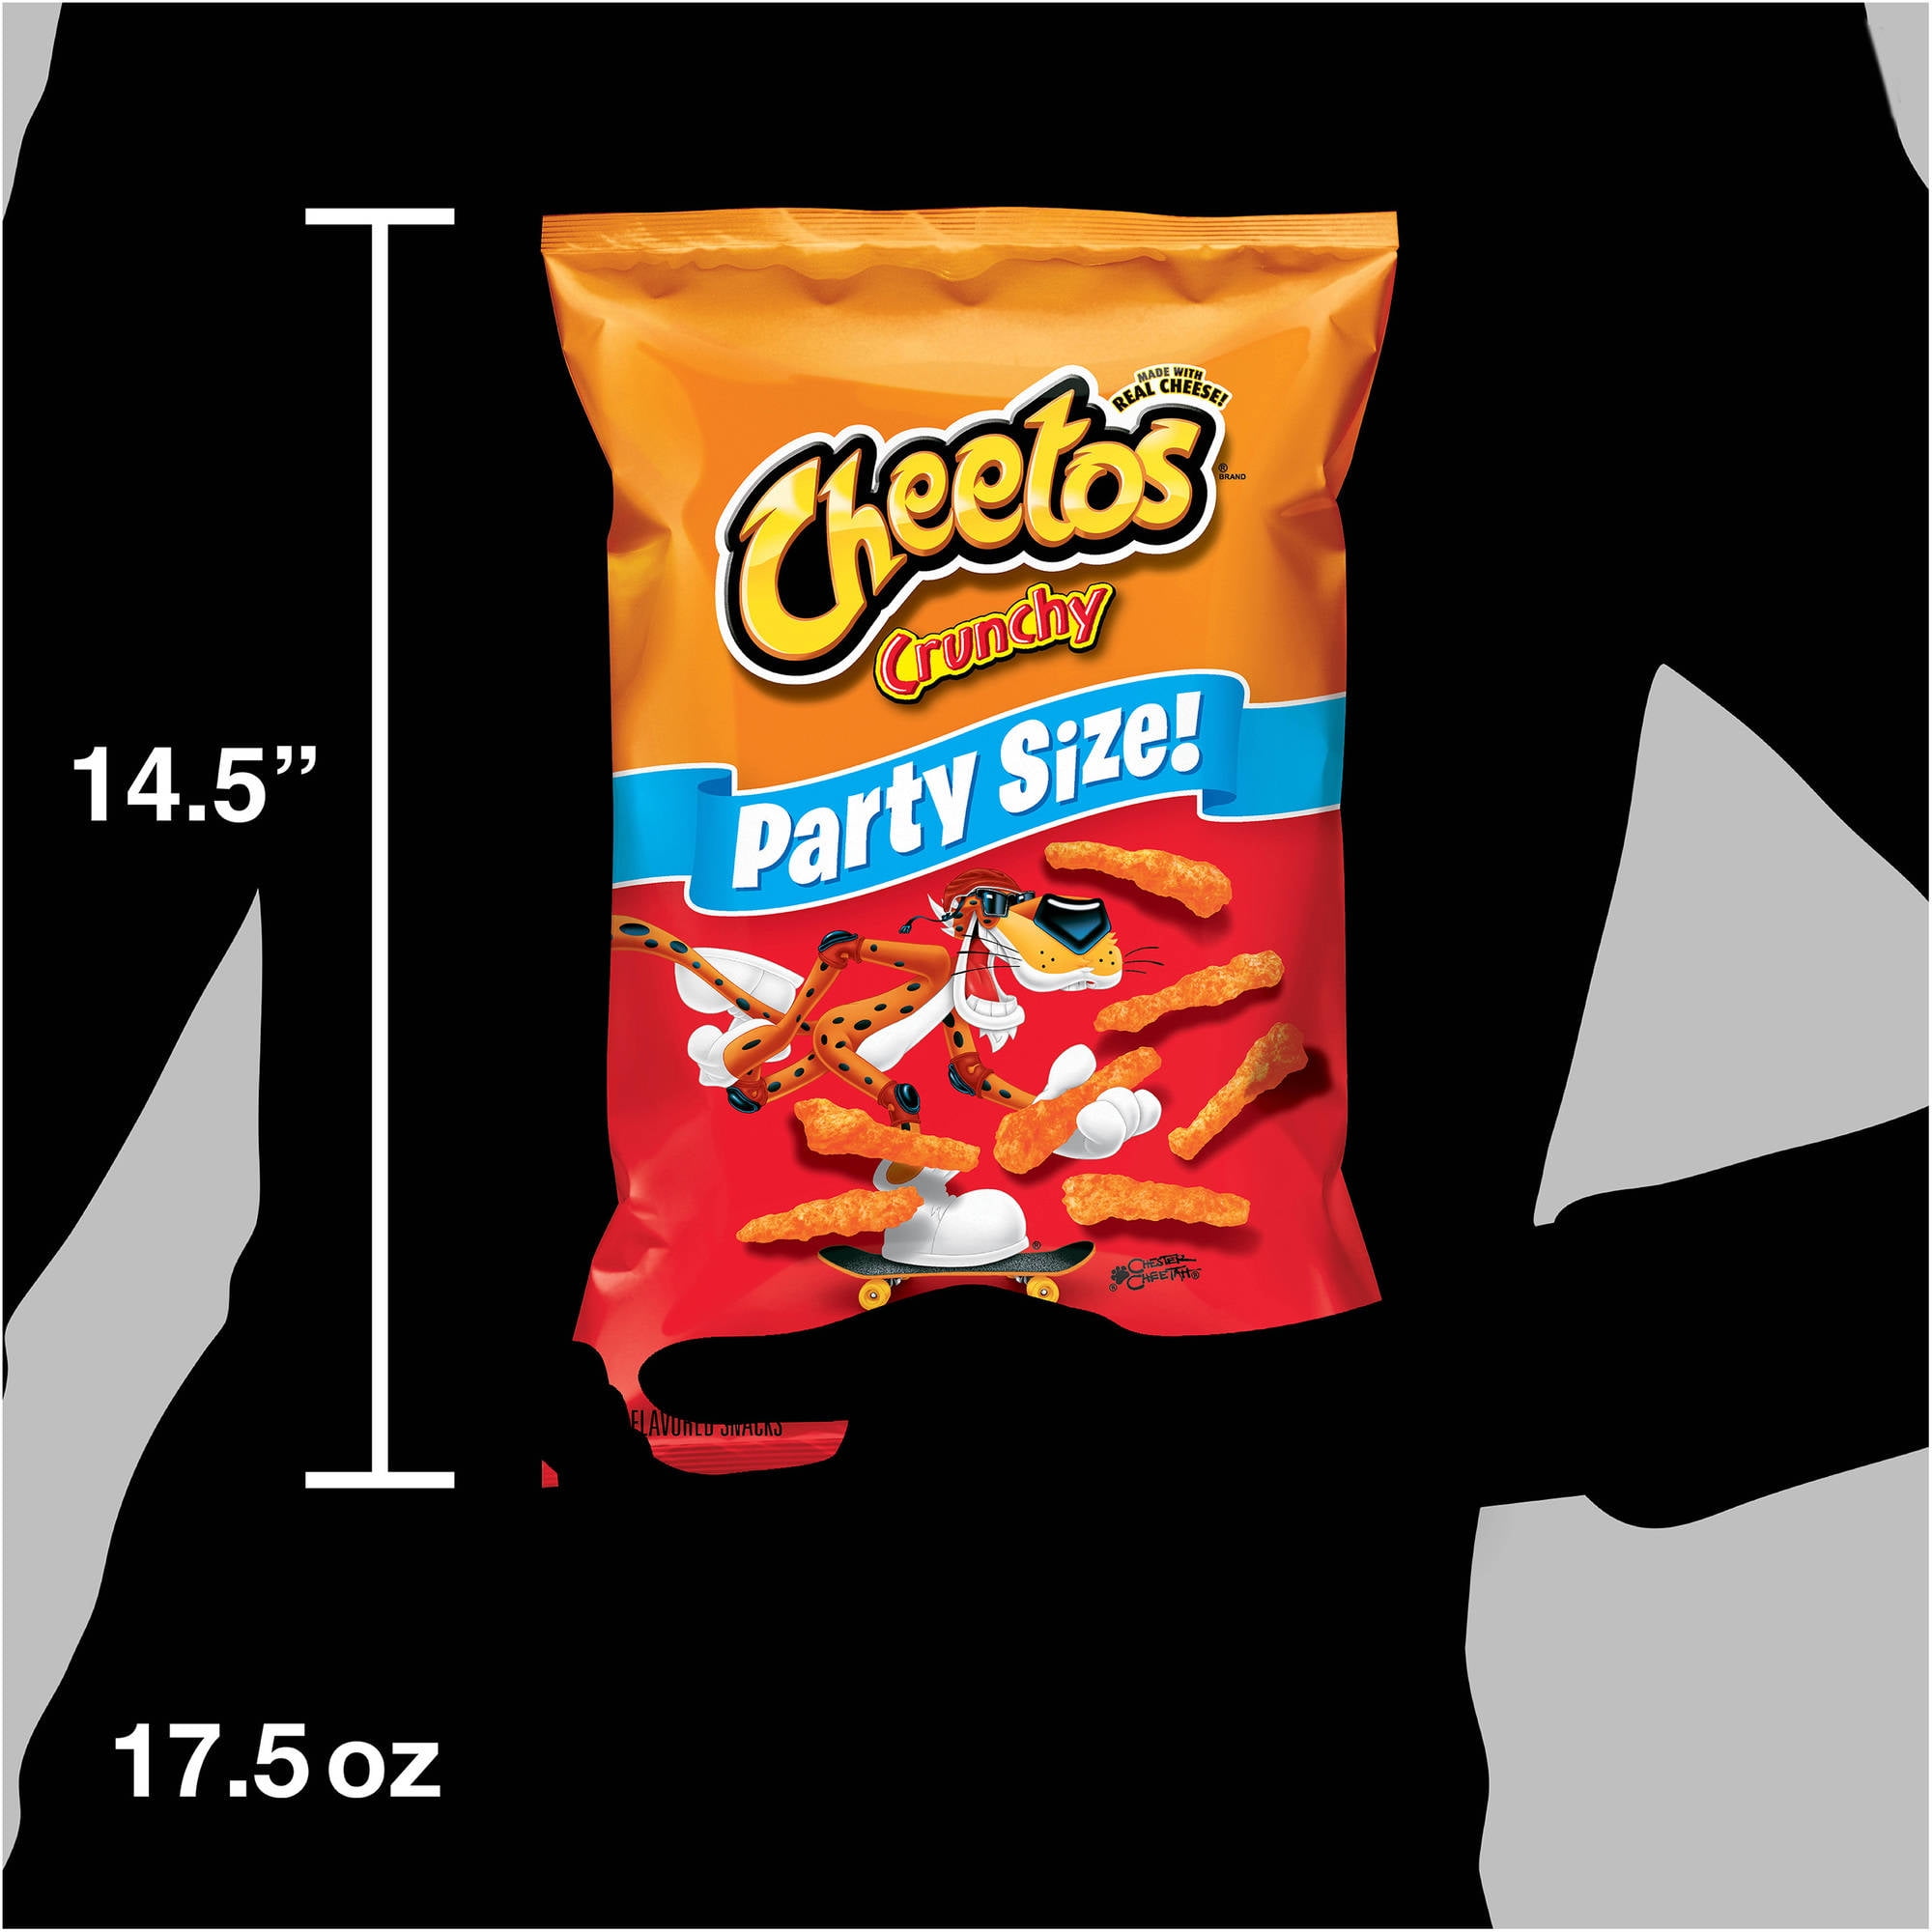 Cheetos Crunchy Cheese Flavored Snacks, Party Size, 17.5 oz ...